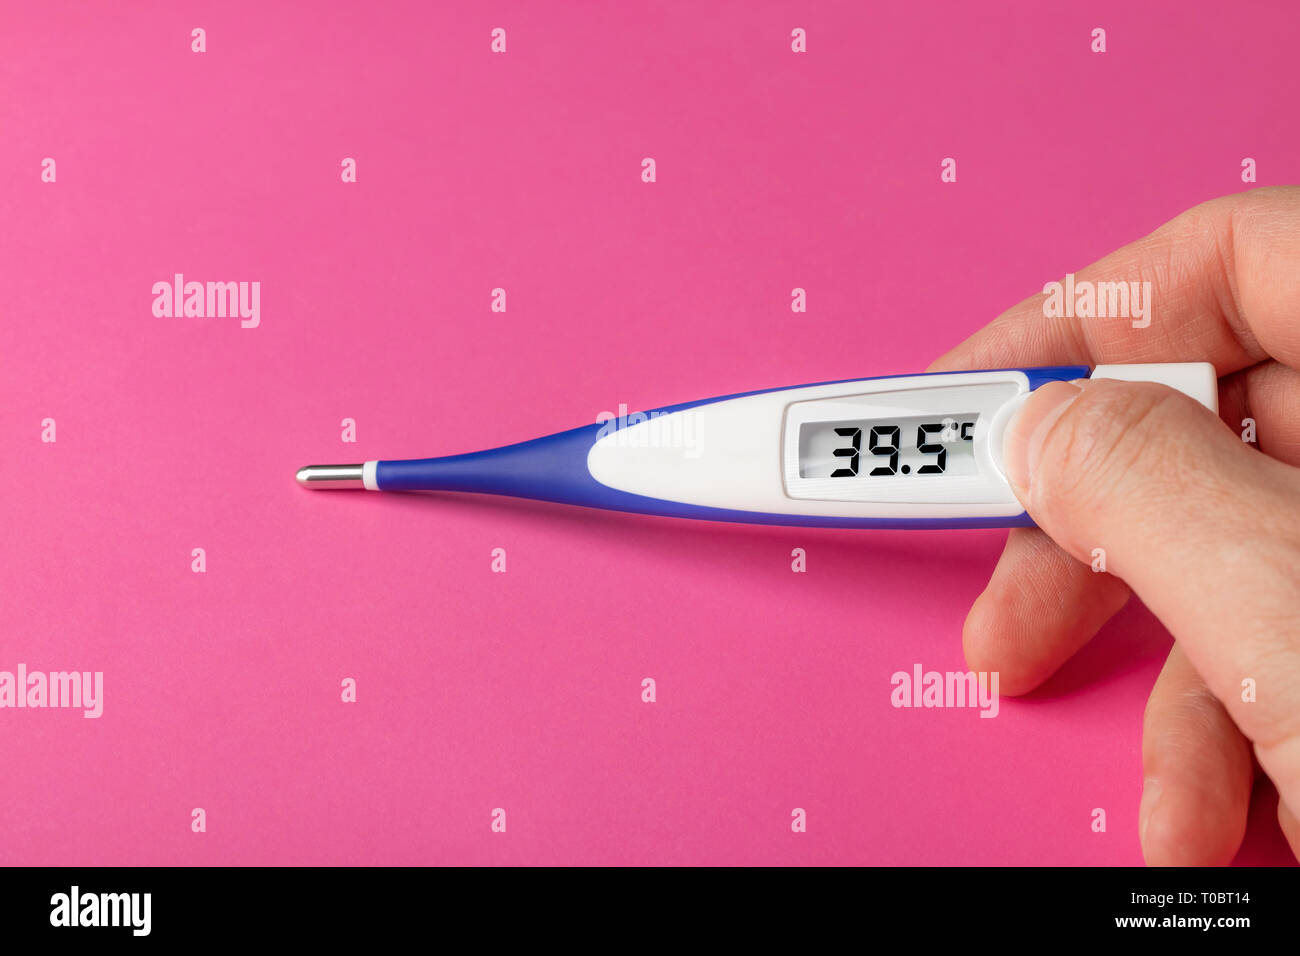 White-blue thermometer with a high temperature of 39.5 degrees Celsius in hand on a pink background Stock Photo